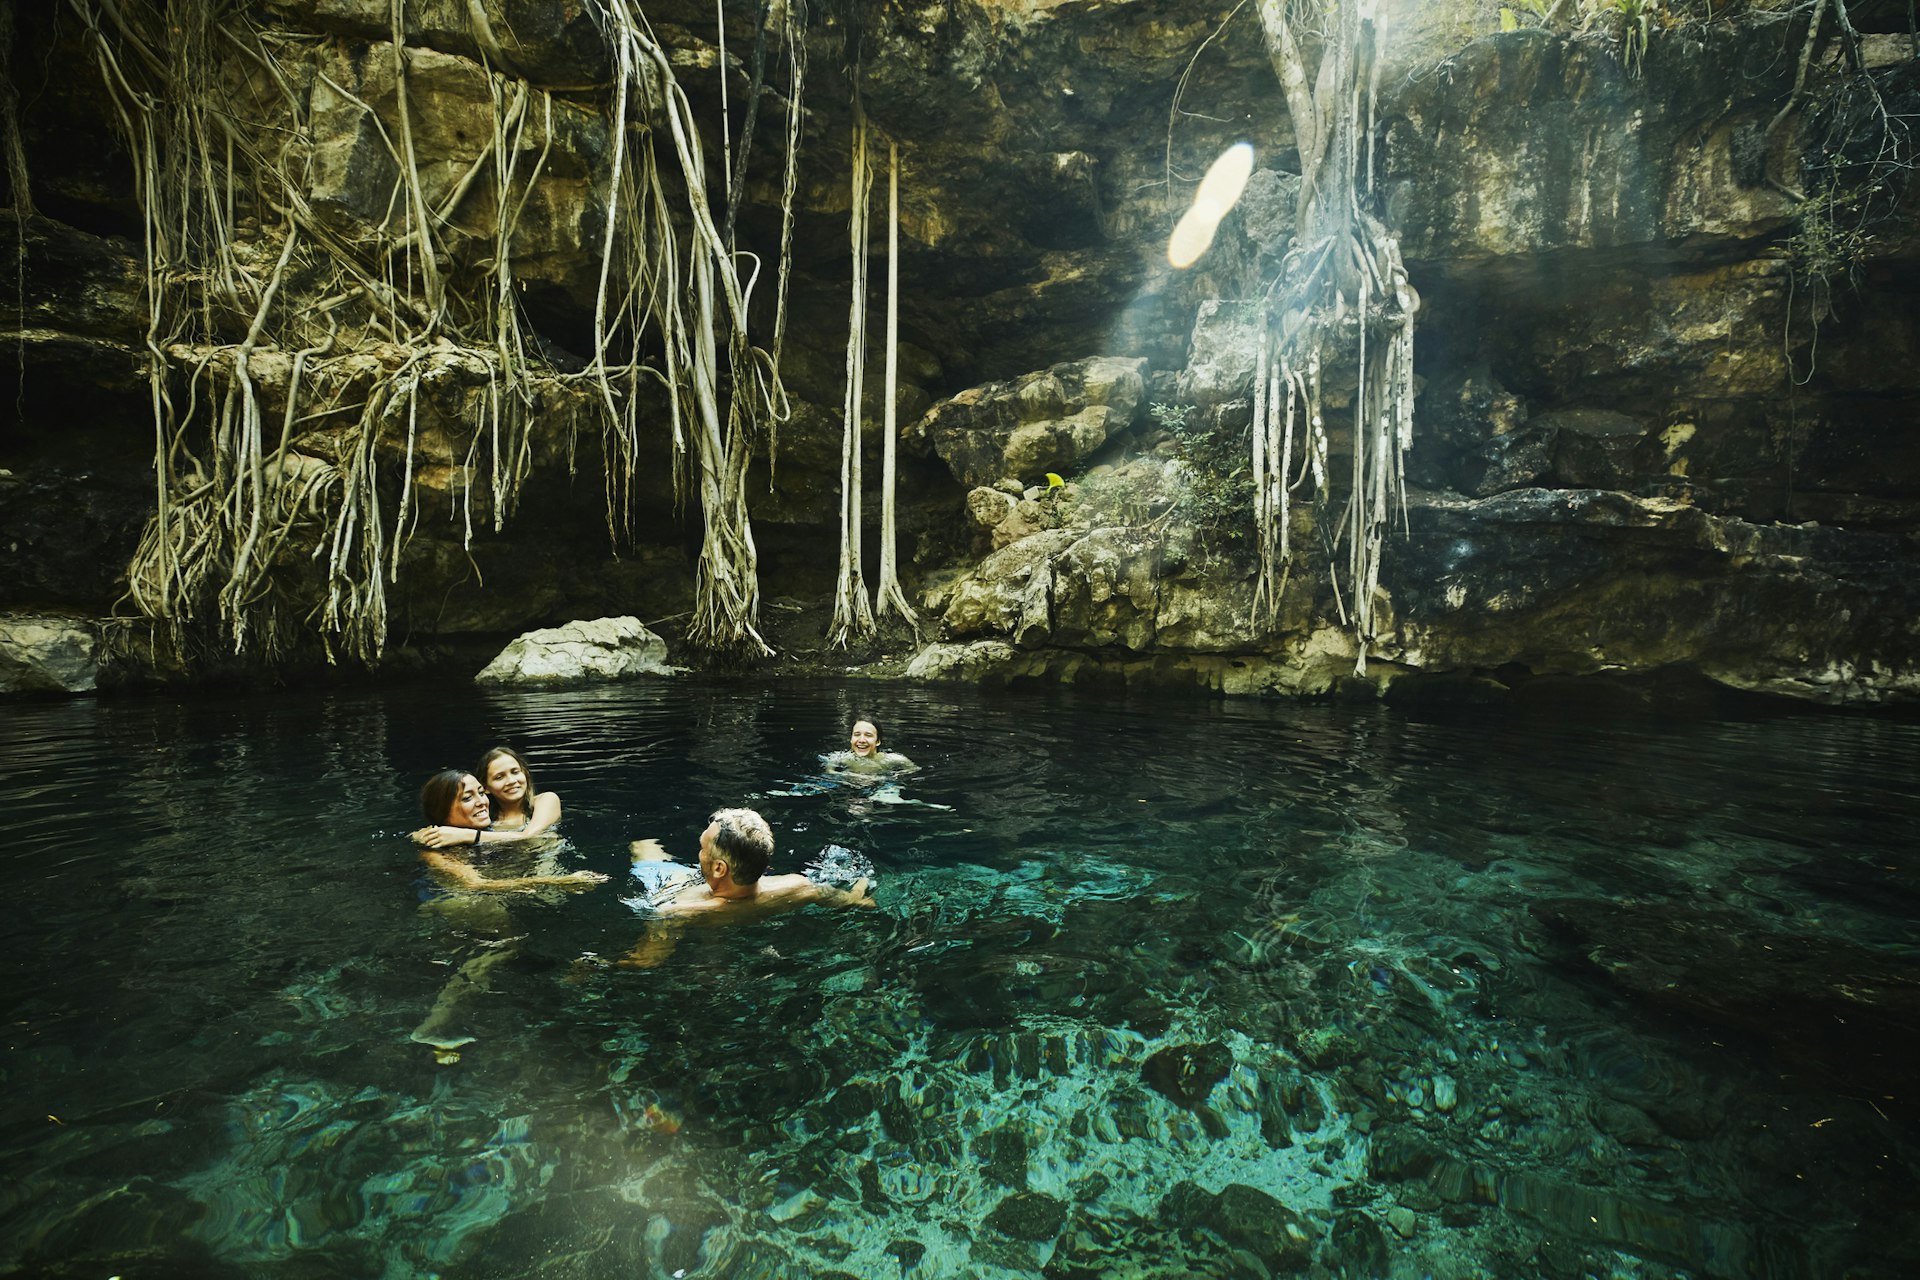 A family with two children swim together in a freshwater pool that's formed in a cave system